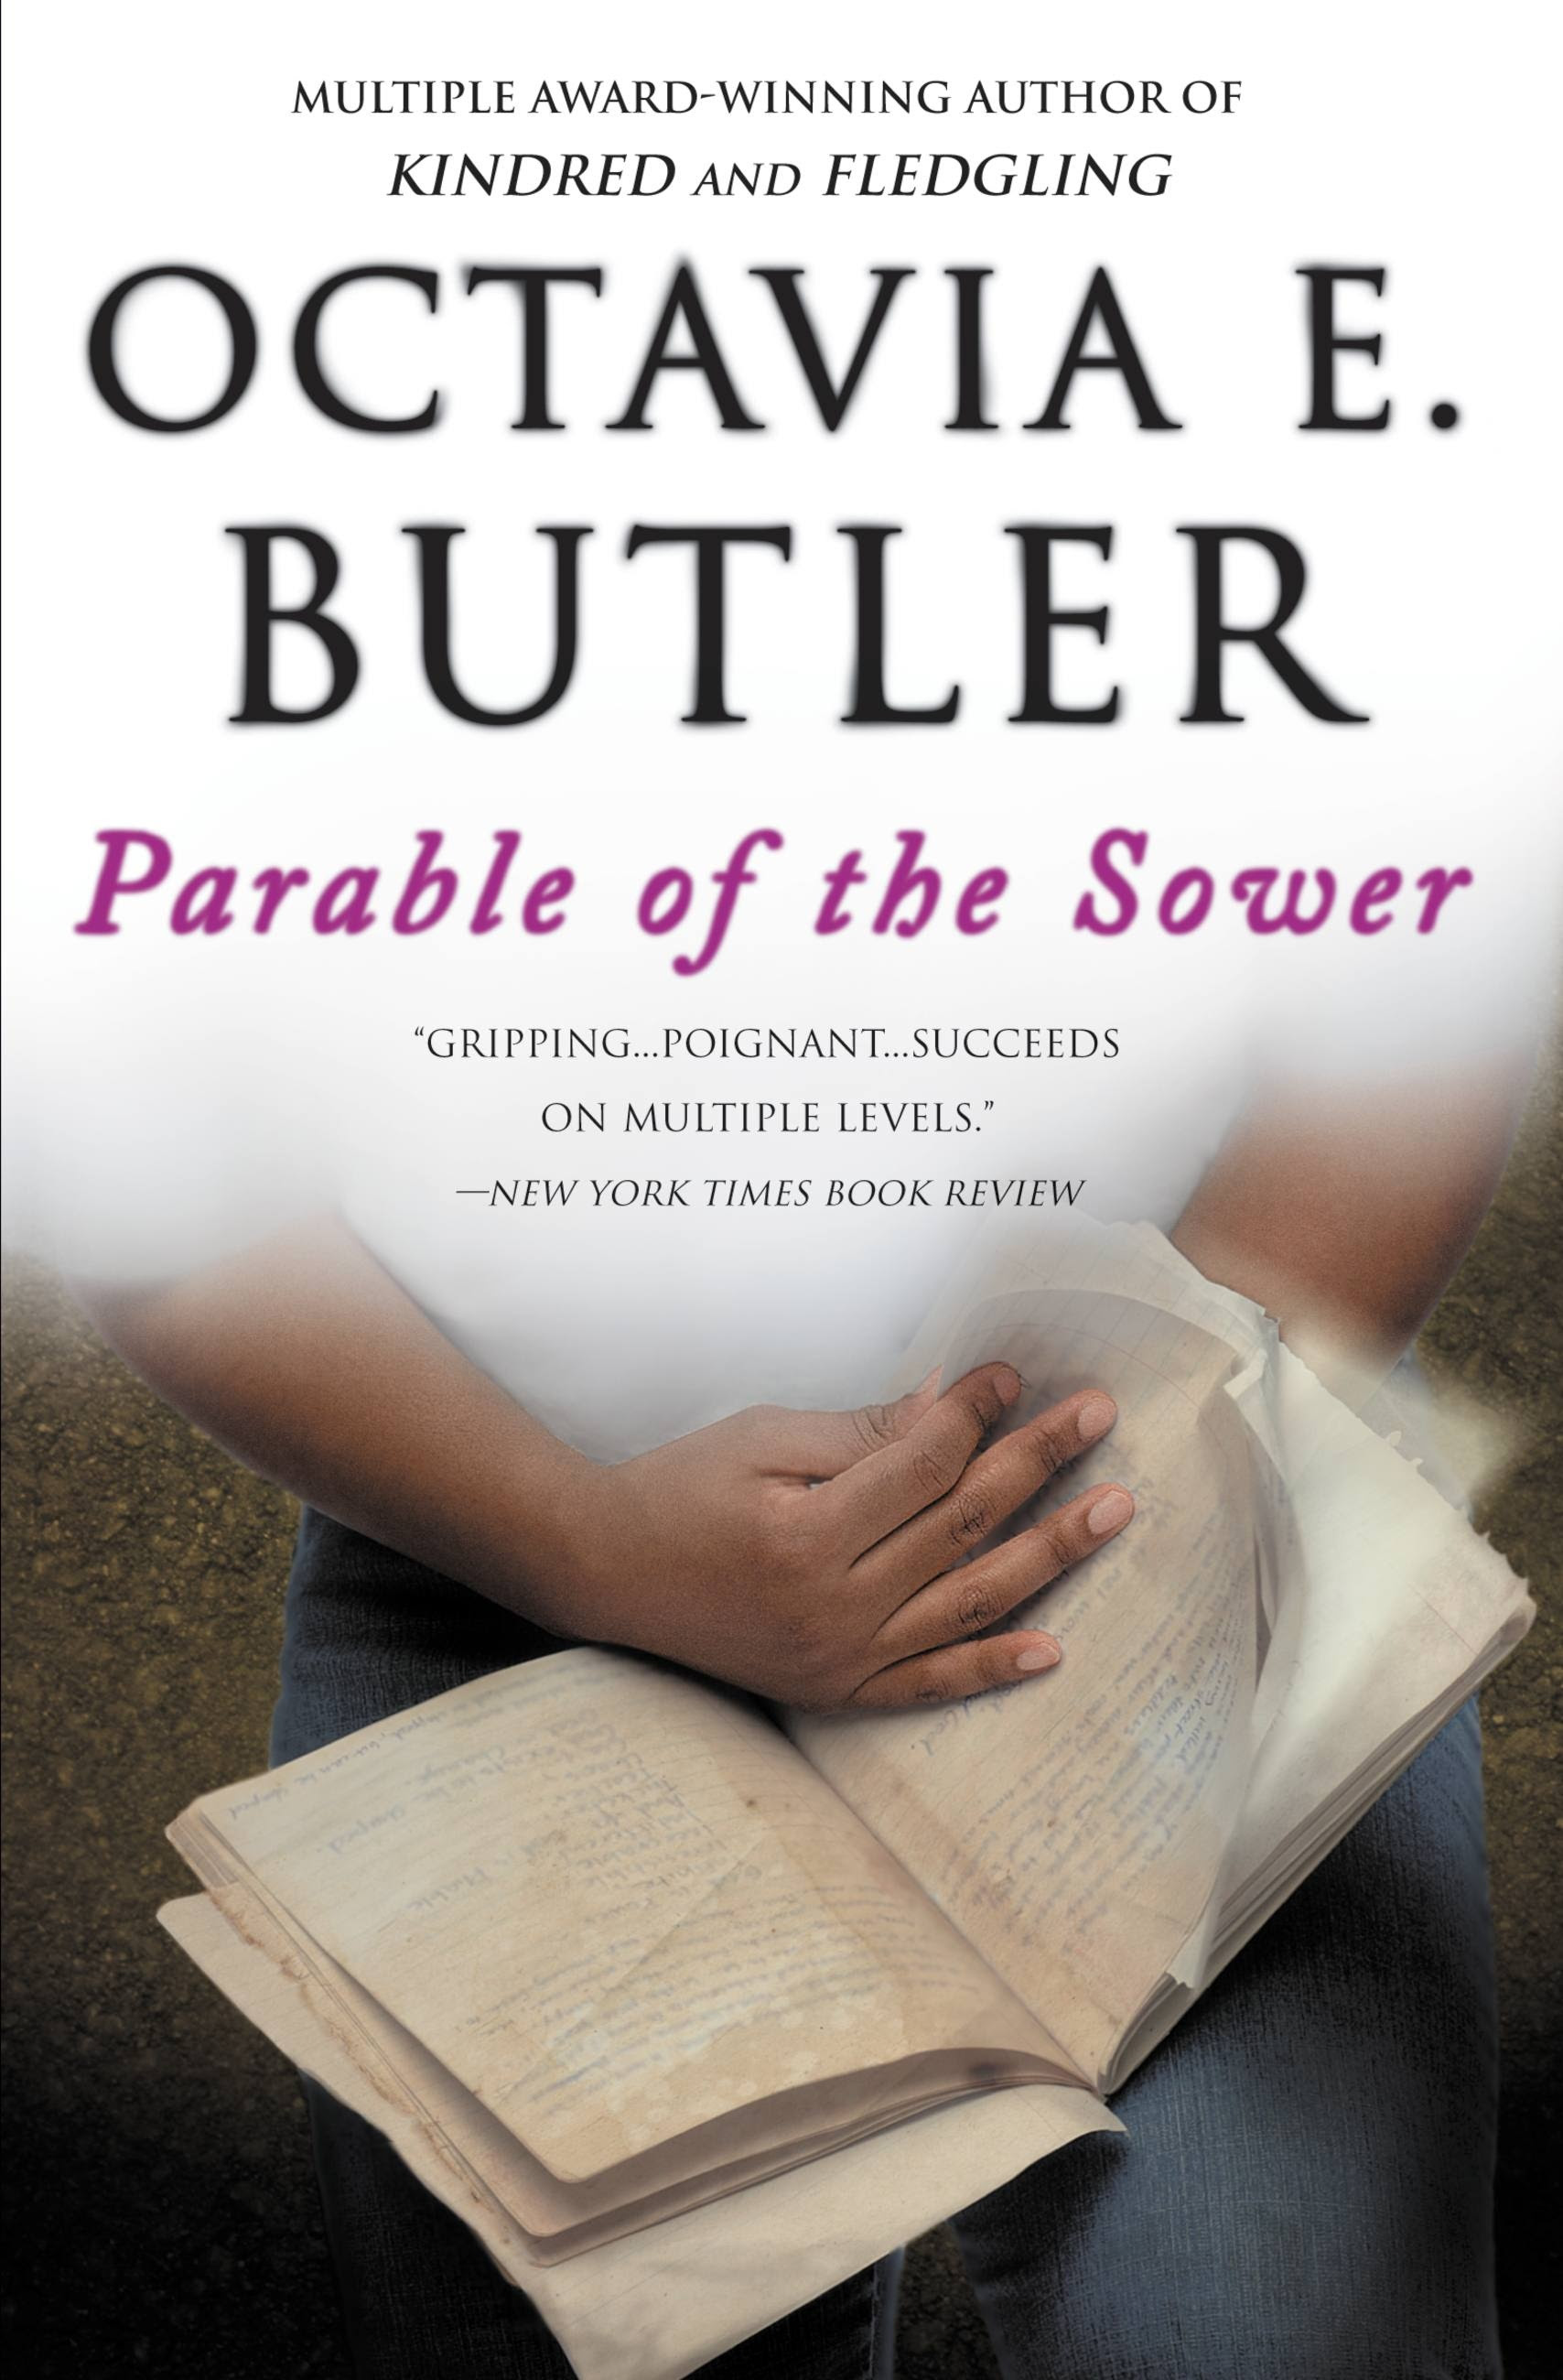 Parable of the Sower by Octavia E. Butler | Hachette Book ...